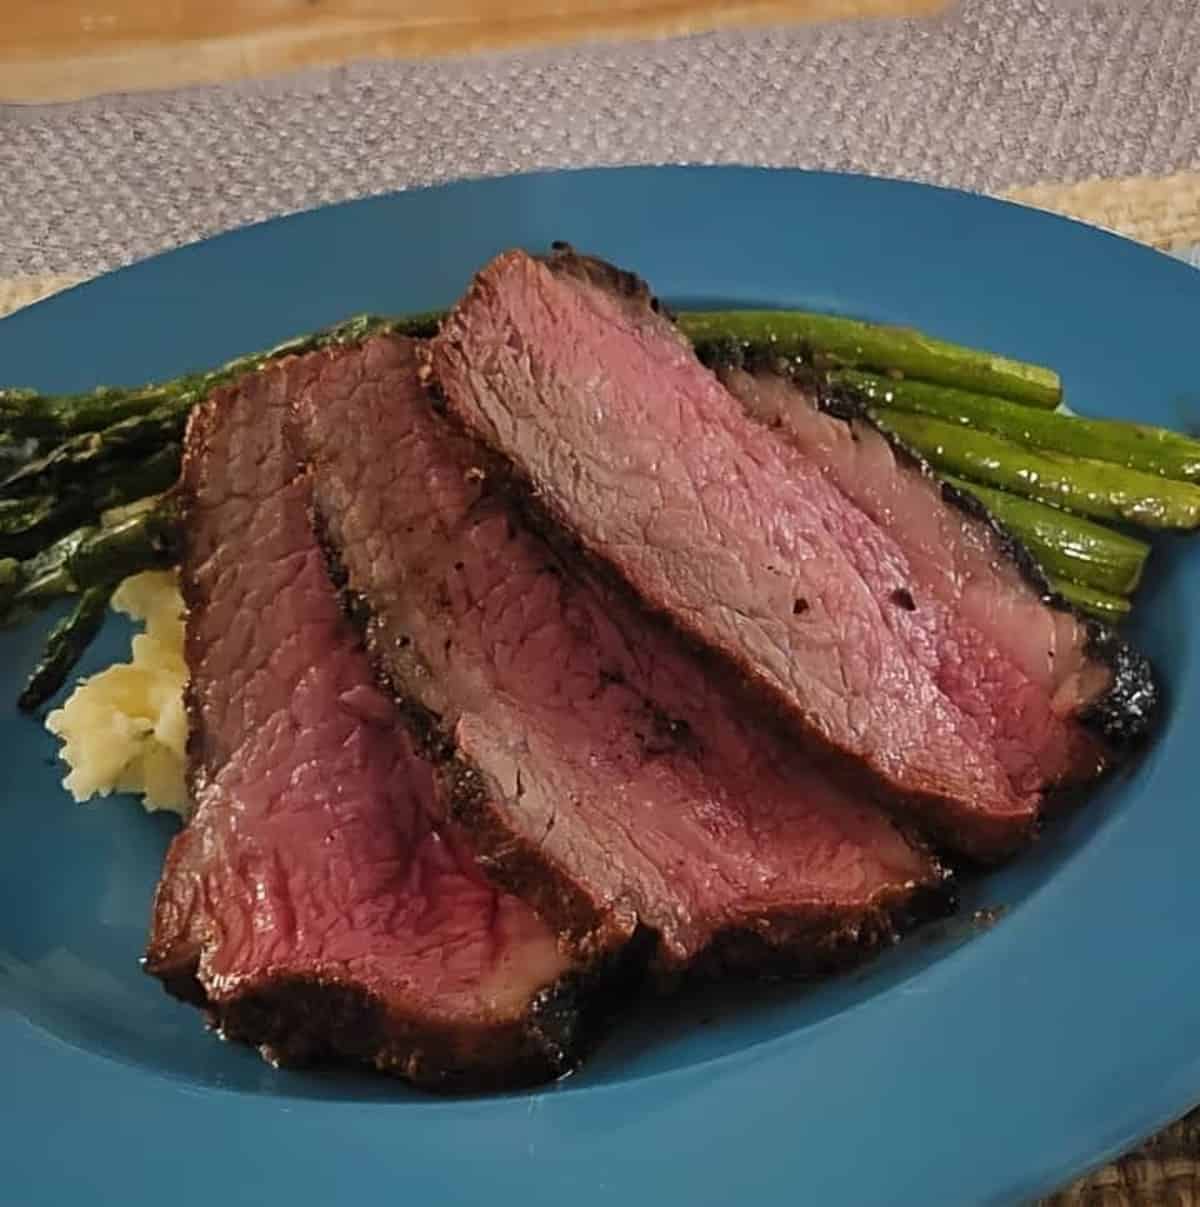 Plated sliced tri tip steak with grilled asparagus